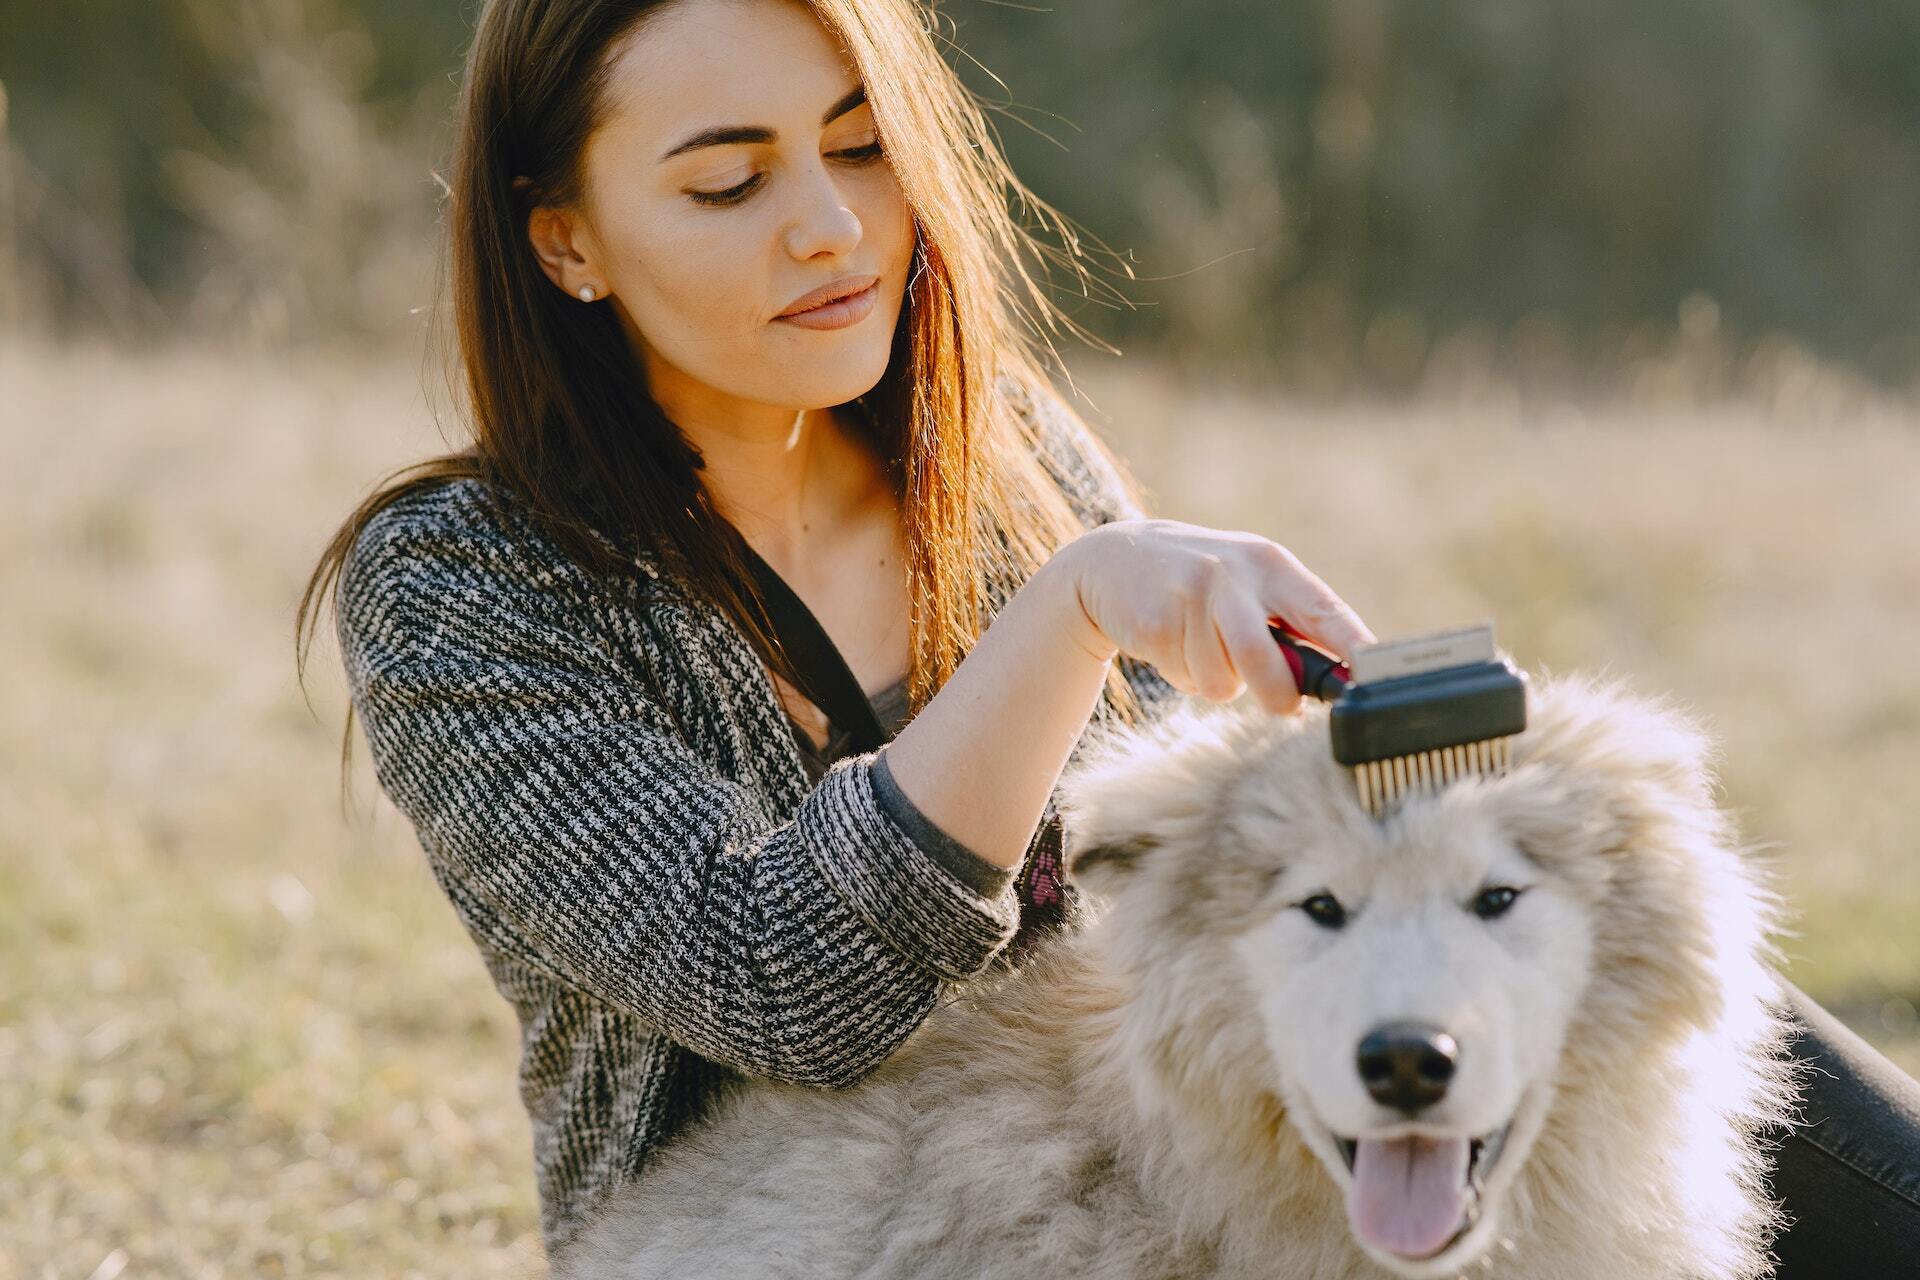 A woman grooming her dog by brushing their coat